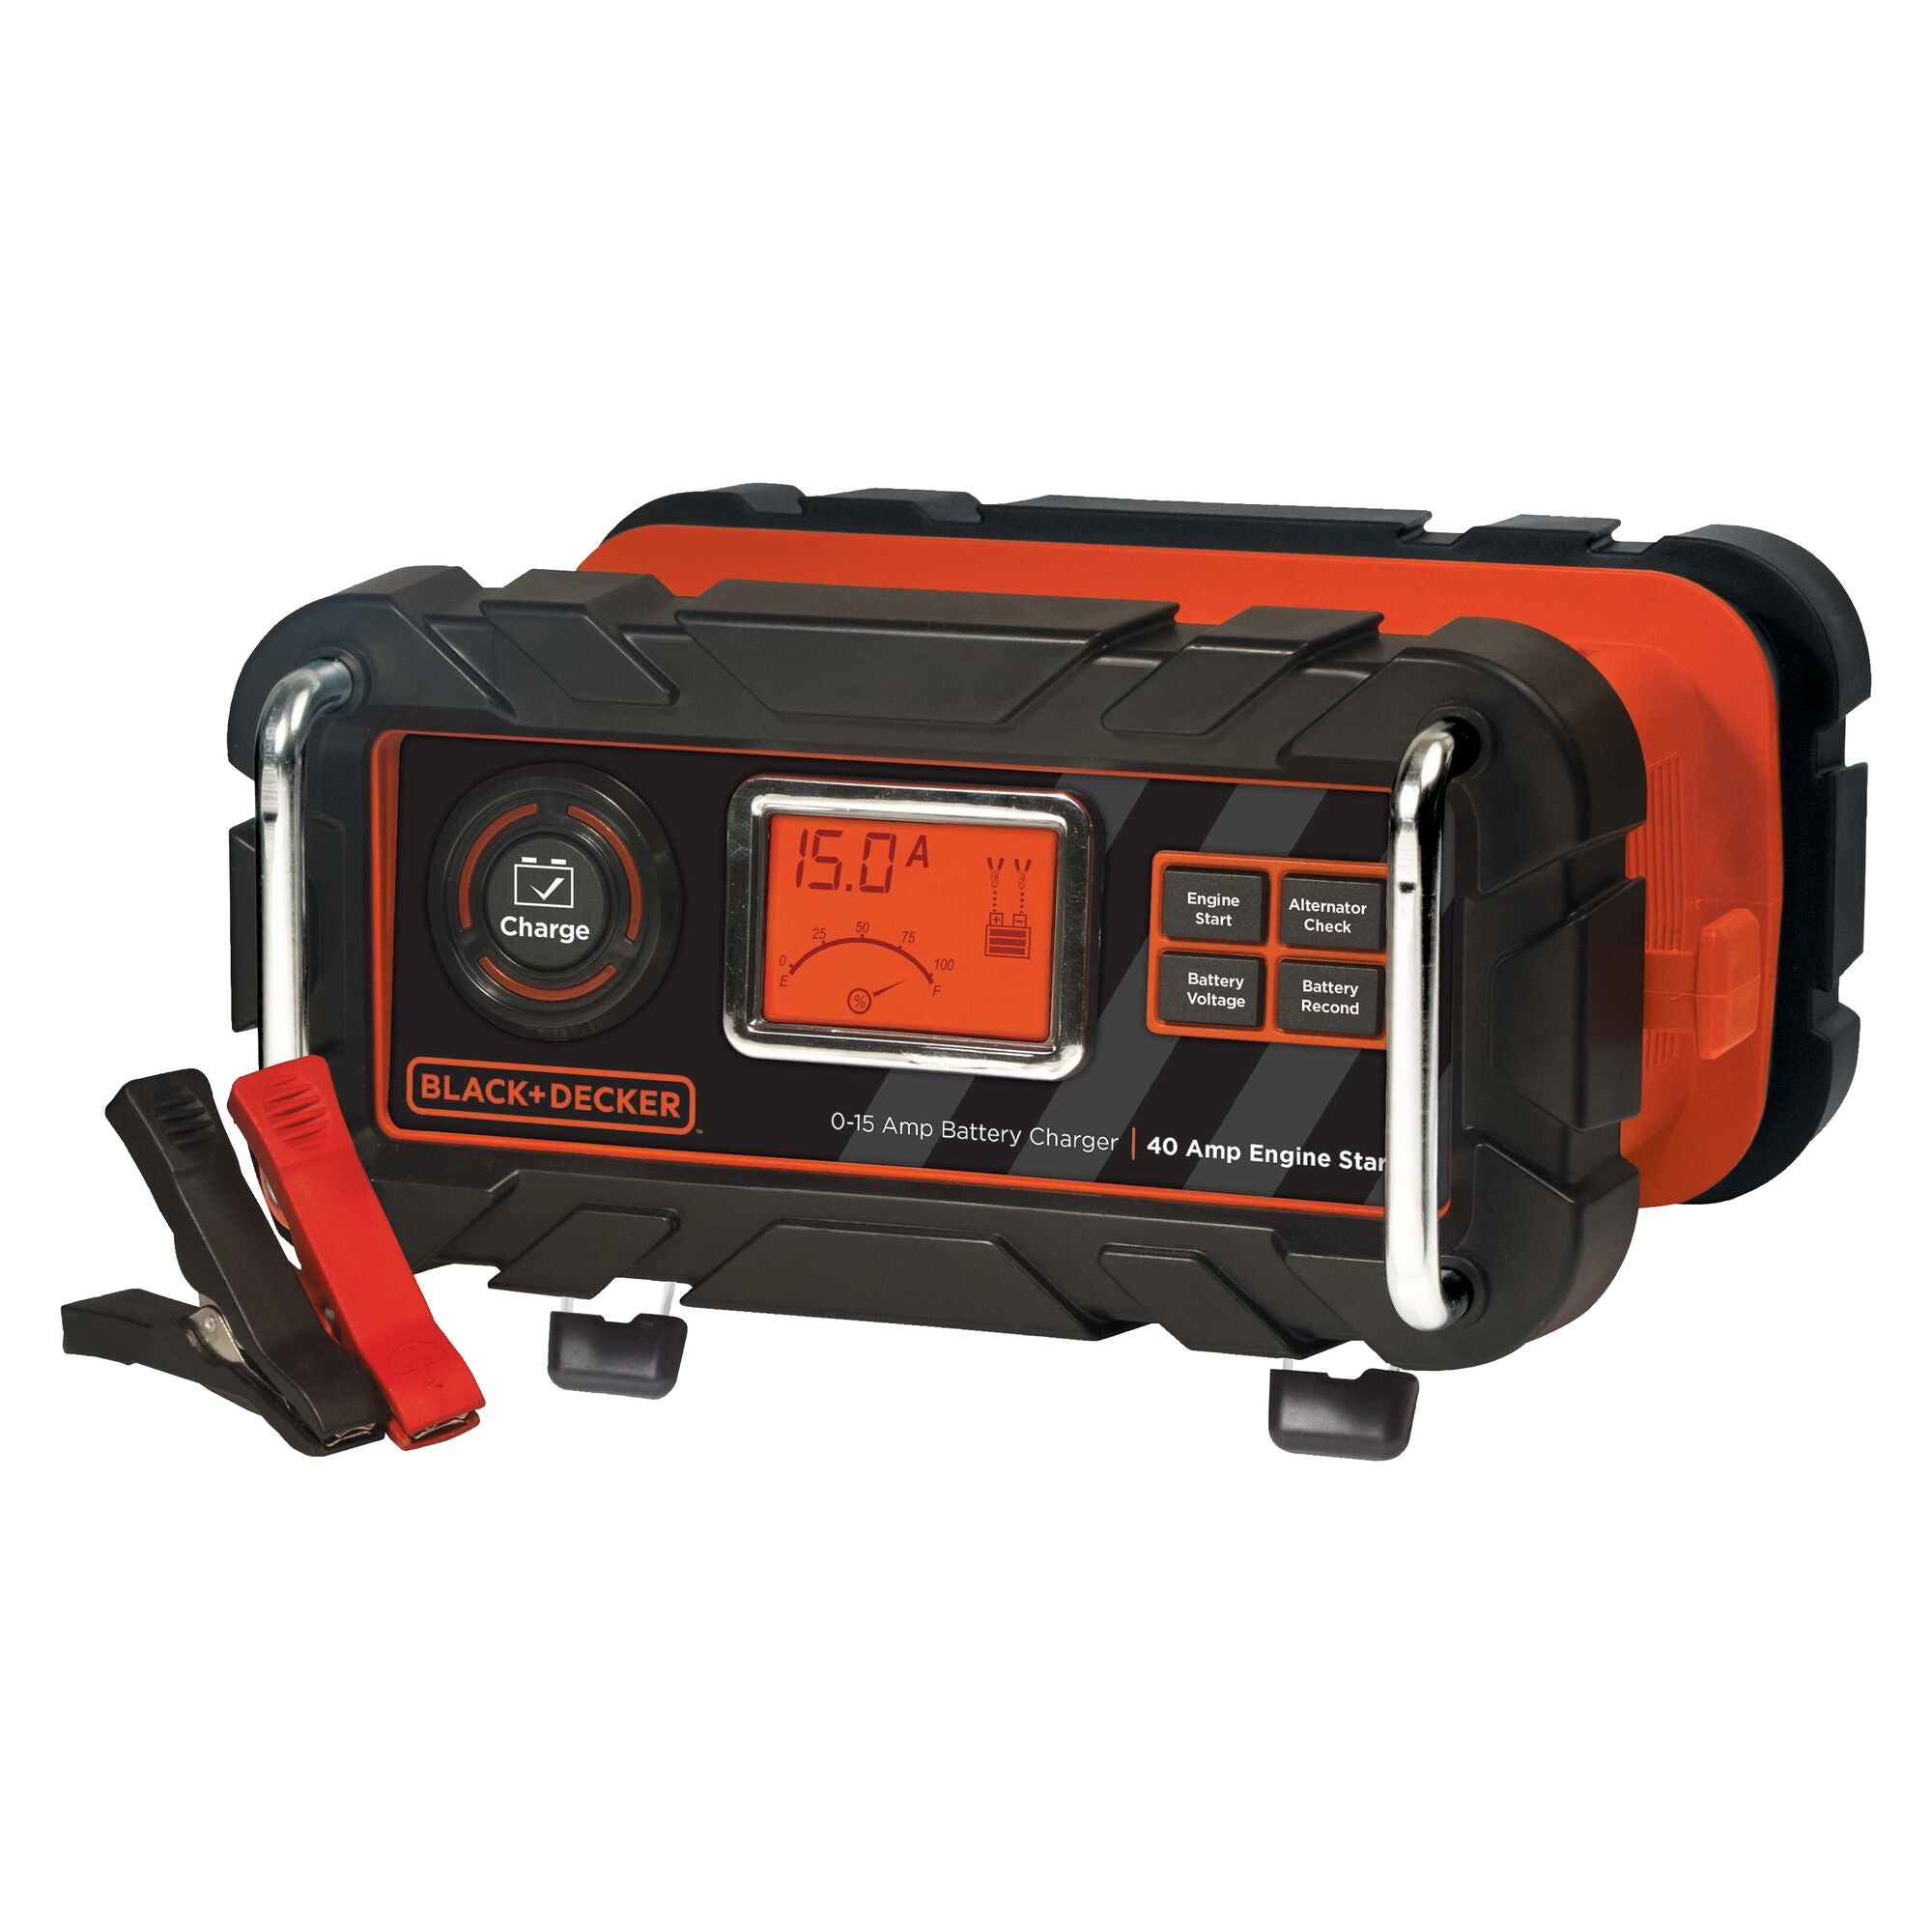 Black & Decker Charger & Battery Combo Set and 50 similar items